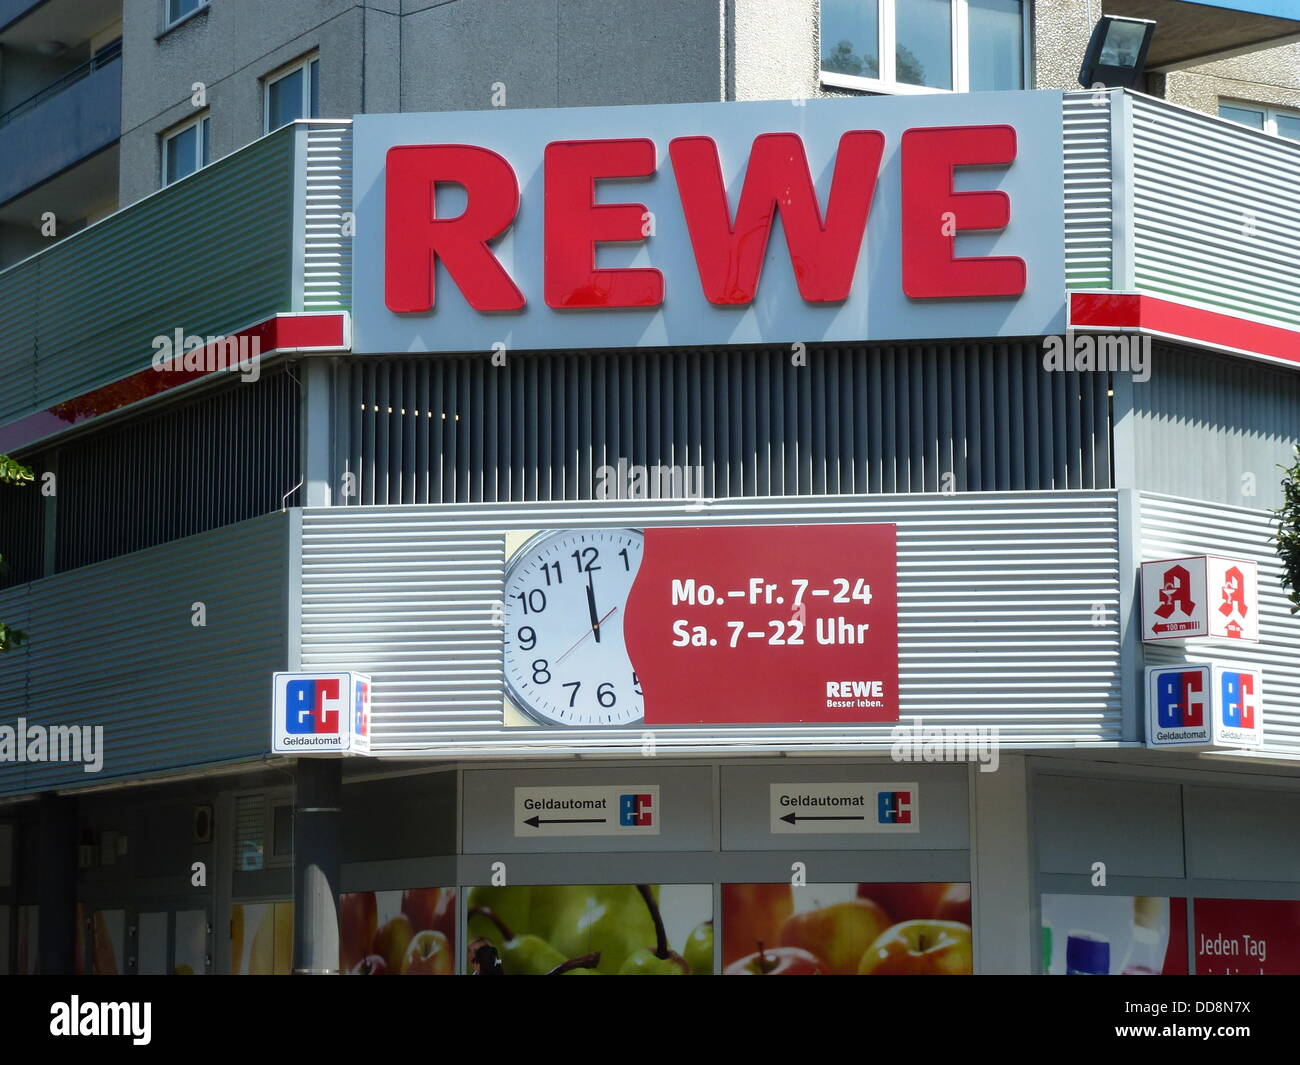 Page 2 - Rewe High Resolution Stock Photography and Images - Alamy